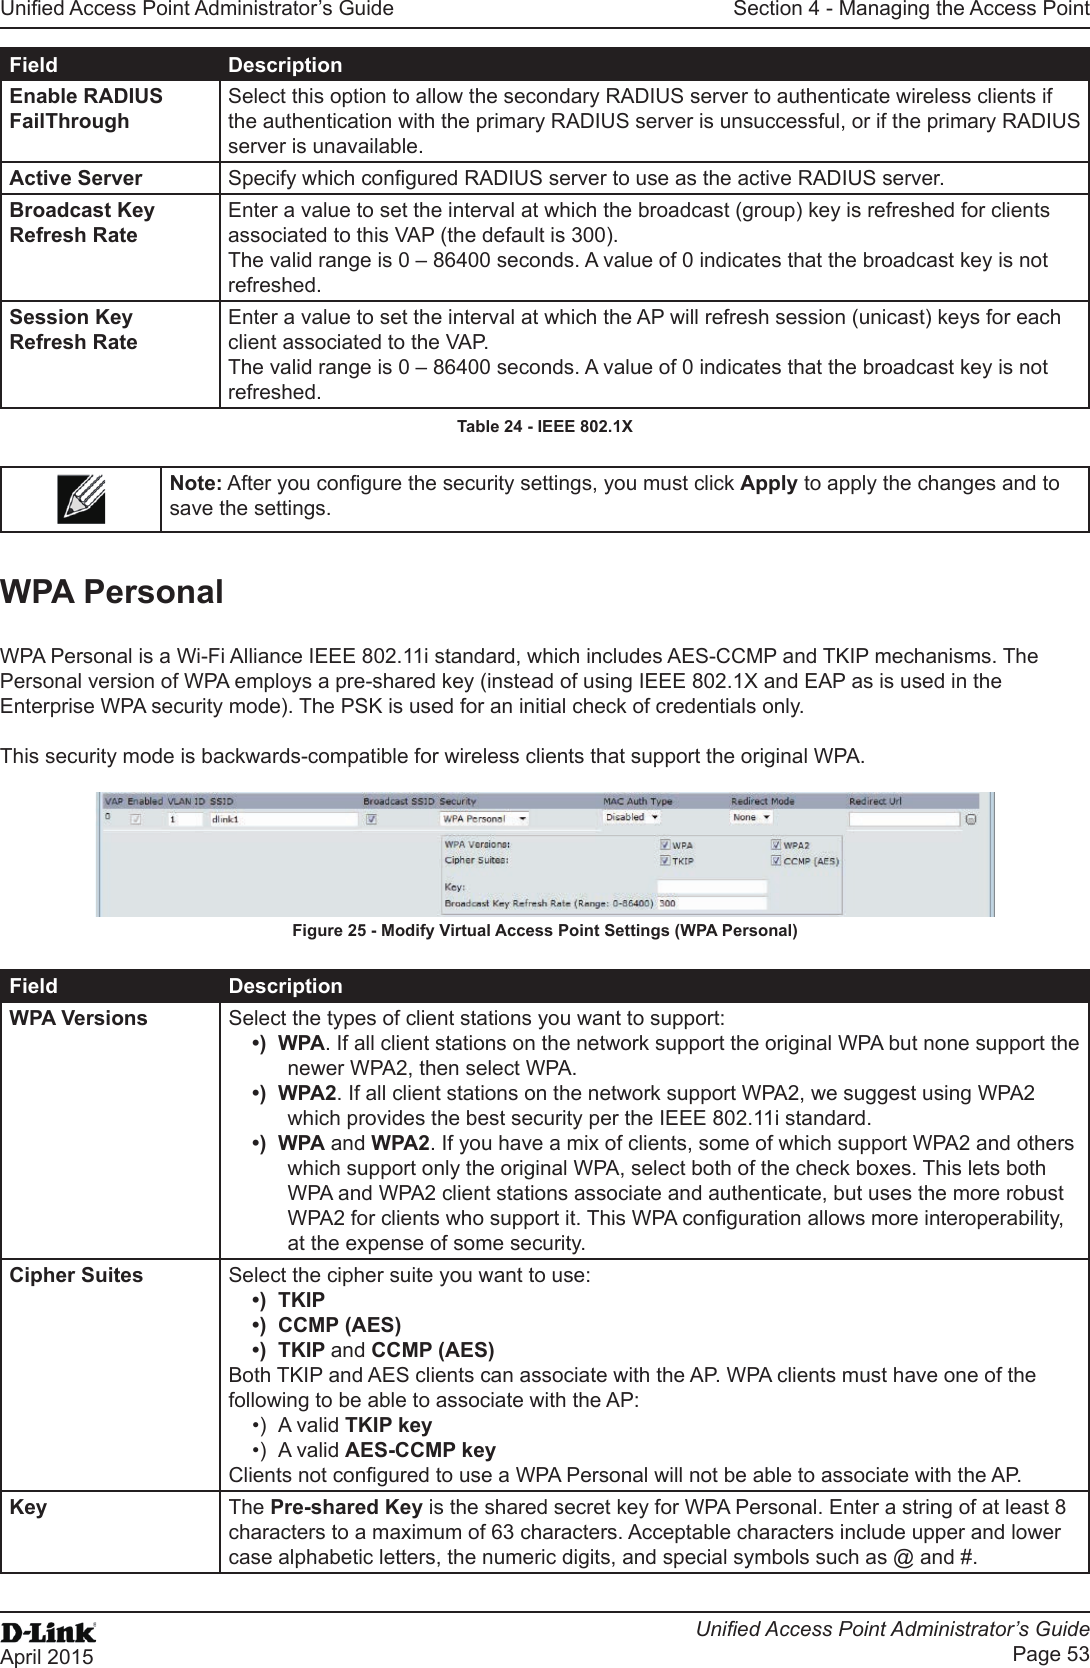 Unied Access Point Administrator’s GuideUnied Access Point Administrator’s GuidePage 53April 2015Section 4 - Managing the Access PointField DescriptionEnable RADIUS FailThroughSelect this option to allow the secondary RADIUS server to authenticate wireless clients if the authentication with the primary RADIUS server is unsuccessful, or if the primary RADIUS server is unavailable.Active Server Specify which congured RADIUS server to use as the active RADIUS server.Broadcast Key Refresh RateEnter a value to set the interval at which the broadcast (group) key is refreshed for clients associated to this VAP (the default is 300). The valid range is 0 – 86400 seconds. A value of 0 indicates that the broadcast key is not refreshed.Session Key Refresh RateEnter a value to set the interval at which the AP will refresh session (unicast) keys for each client associated to the VAP. The valid range is 0 – 86400 seconds. A value of 0 indicates that the broadcast key is not refreshed.Table 24 - IEEE 802.1XNote: After you congure the security settings, you must click Apply to apply the changes and to save the settings. WPA PersonalWPA Personal is a Wi-Fi Alliance IEEE 802.11i standard, which includes AES-CCMP and TKIP mechanisms. The Personal version of WPA employs a pre-shared key (instead of using IEEE 802.1X and EAP as is used in the Enterprise WPA security mode). The PSK is used for an initial check of credentials only.This security mode is backwards-compatible for wireless clients that support the original WPA.Figure 25 - Modify Virtual Access Point Settings (WPA Personal)Field DescriptionWPA Versions Select the types of client stations you want to support:•)  WPA. If all client stations on the network support the original WPA but none support the newer WPA2, then select WPA.•)  WPA2. If all client stations on the network support WPA2, we suggest using WPA2 which provides the best security per the IEEE 802.11i standard.•)  WPA and WPA2. If you have a mix of clients, some of which support WPA2 and others which support only the original WPA, select both of the check boxes. This lets both WPA and WPA2 client stations associate and authenticate, but uses the more robust WPA2 for clients who support it. This WPA conguration allows more interoperability, at the expense of some security.Cipher Suites Select the cipher suite you want to use:•)  TKIP•)  CCMP (AES)•)  TKIP and CCMP (AES)Both TKIP and AES clients can associate with the AP. WPA clients must have one of the following to be able to associate with the AP:•)  A valid TKIP key•)  A valid AES-CCMP keyClients not congured to use a WPA Personal will not be able to associate with the AP.Key The Pre-shared Key is the shared secret key for WPA Personal. Enter a string of at least 8 characters to a maximum of 63 characters. Acceptable characters include upper and lower case alphabetic letters, the numeric digits, and special symbols such as @ and #.